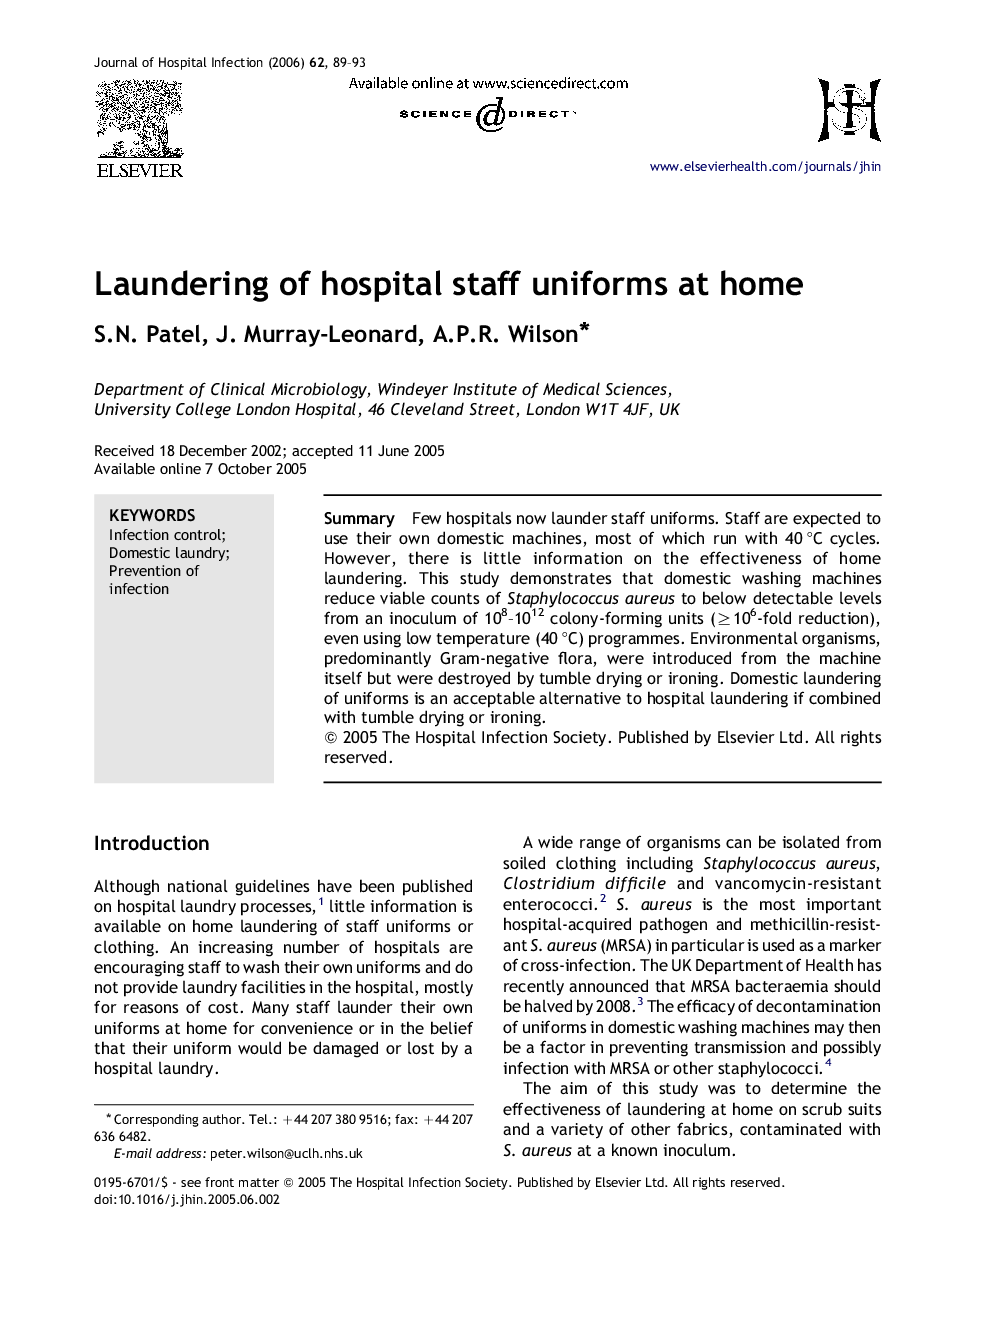 Laundering of hospital staff uniforms at home